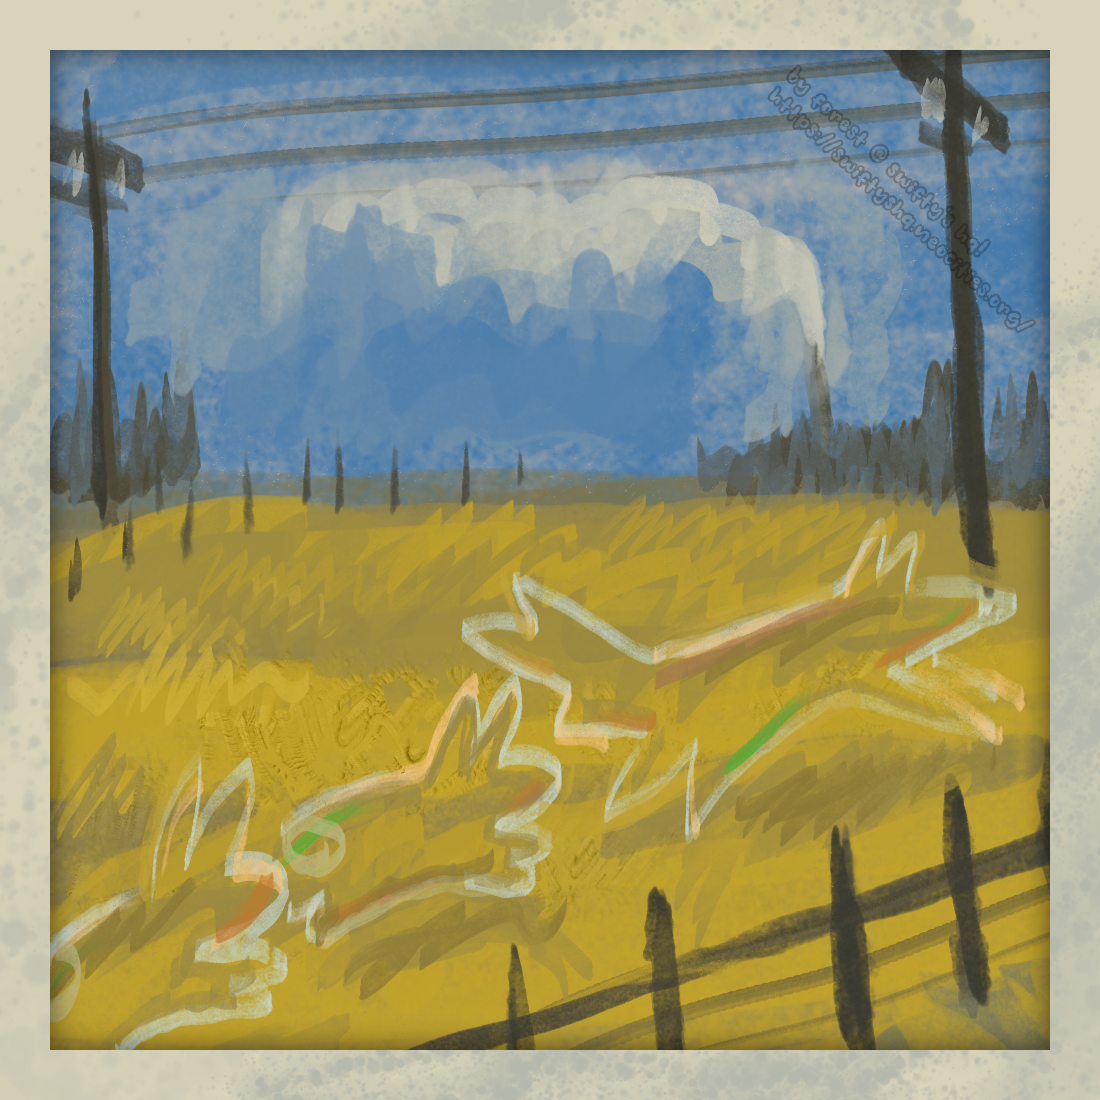 a yellow californian field. a ghostly outline of a fox is being chased by two ghostly hares in the foreground. there are telephone lines and fencing, and trees in the background, from which a pillar of smoke is rising and drifting into the blue.